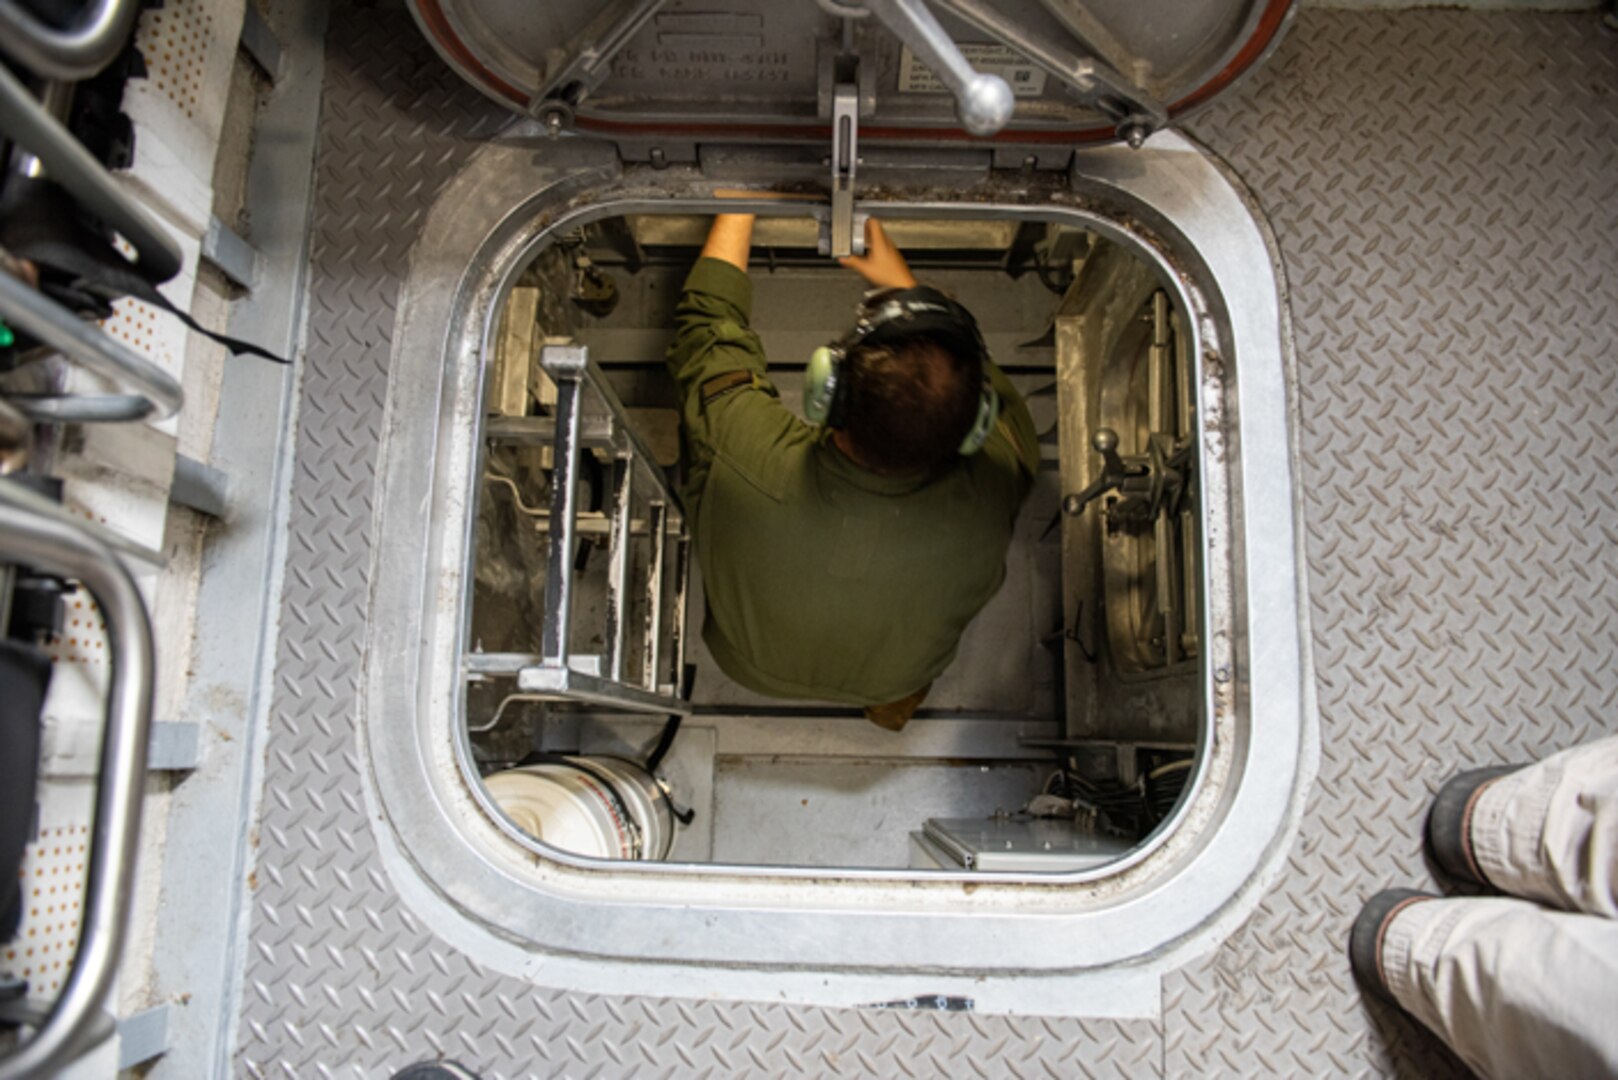 AE1 Dylan Glemming (Flight Engineer) goes below deck during a scenario for the controlled damage tests on the LCAC 100.